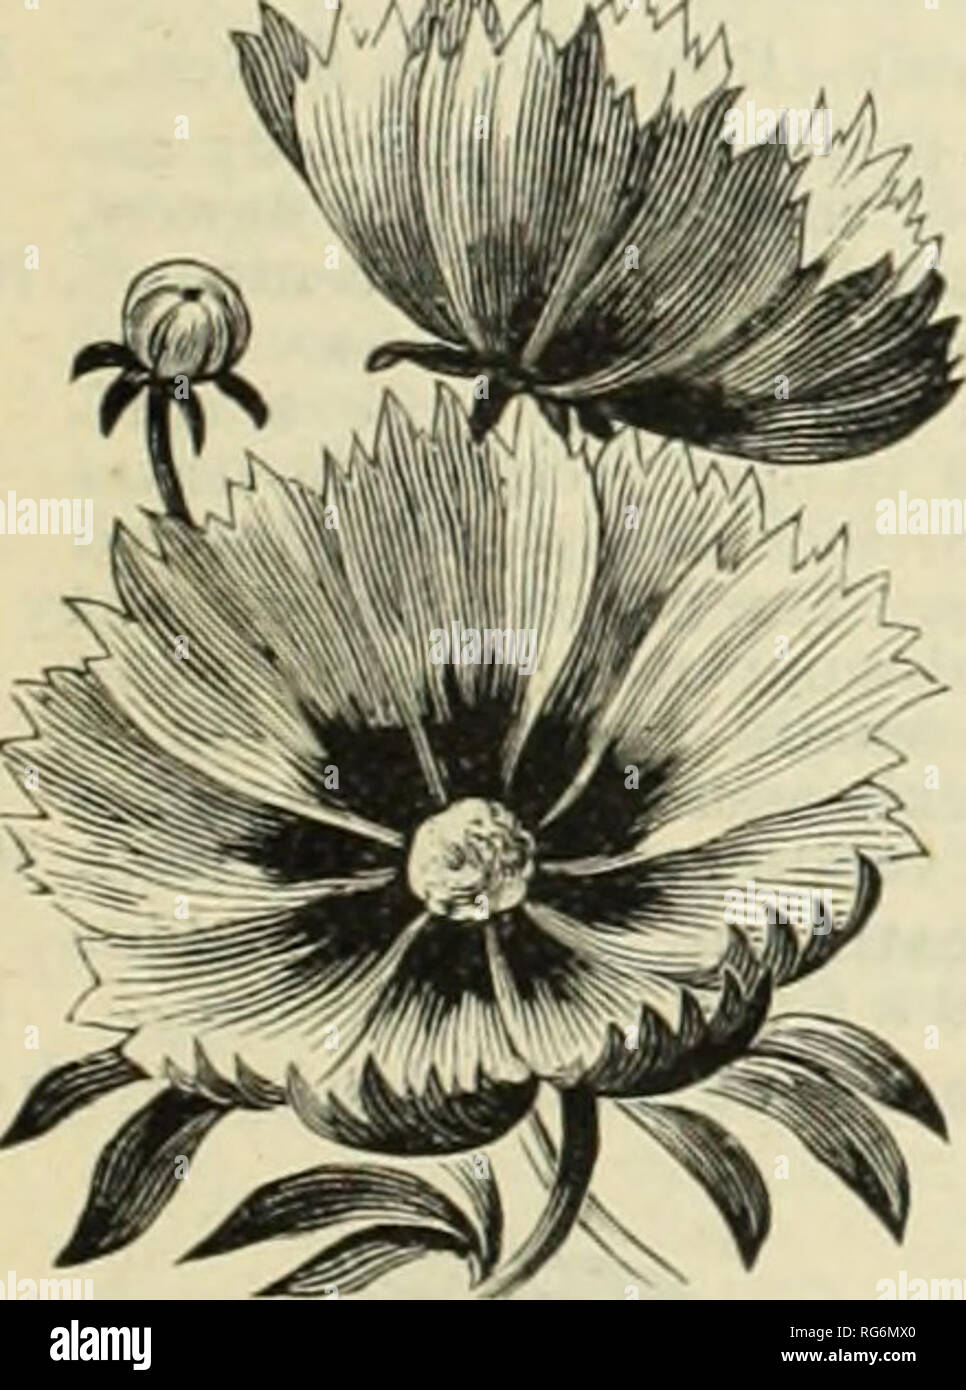 . Burpee's farm annual. Nursery stock Pennsylvania Philadelphia Catalogs; Flowers Pennsylvania Catalogs; Vegetables Pennsylvania Catalogs; Seeds Pennsylvania Catalogs. TER PKT. BIDENS. Atrosanguinea (Dahlia Zimapani or Tlie Miniature Black Dahlia). Plants grow only nine to t welve inches high, with neat, giai eful foliage. They begin to iiower very early, and continue all summer to produce a great profusion of single, dahlia-like flowers. These &quot;Min iatitre Dahlias &quot; are of the deepest, velvety, dark, blood- red^ appearing nearly black, and are borne high above the foli- age, upon lo Stock Photo